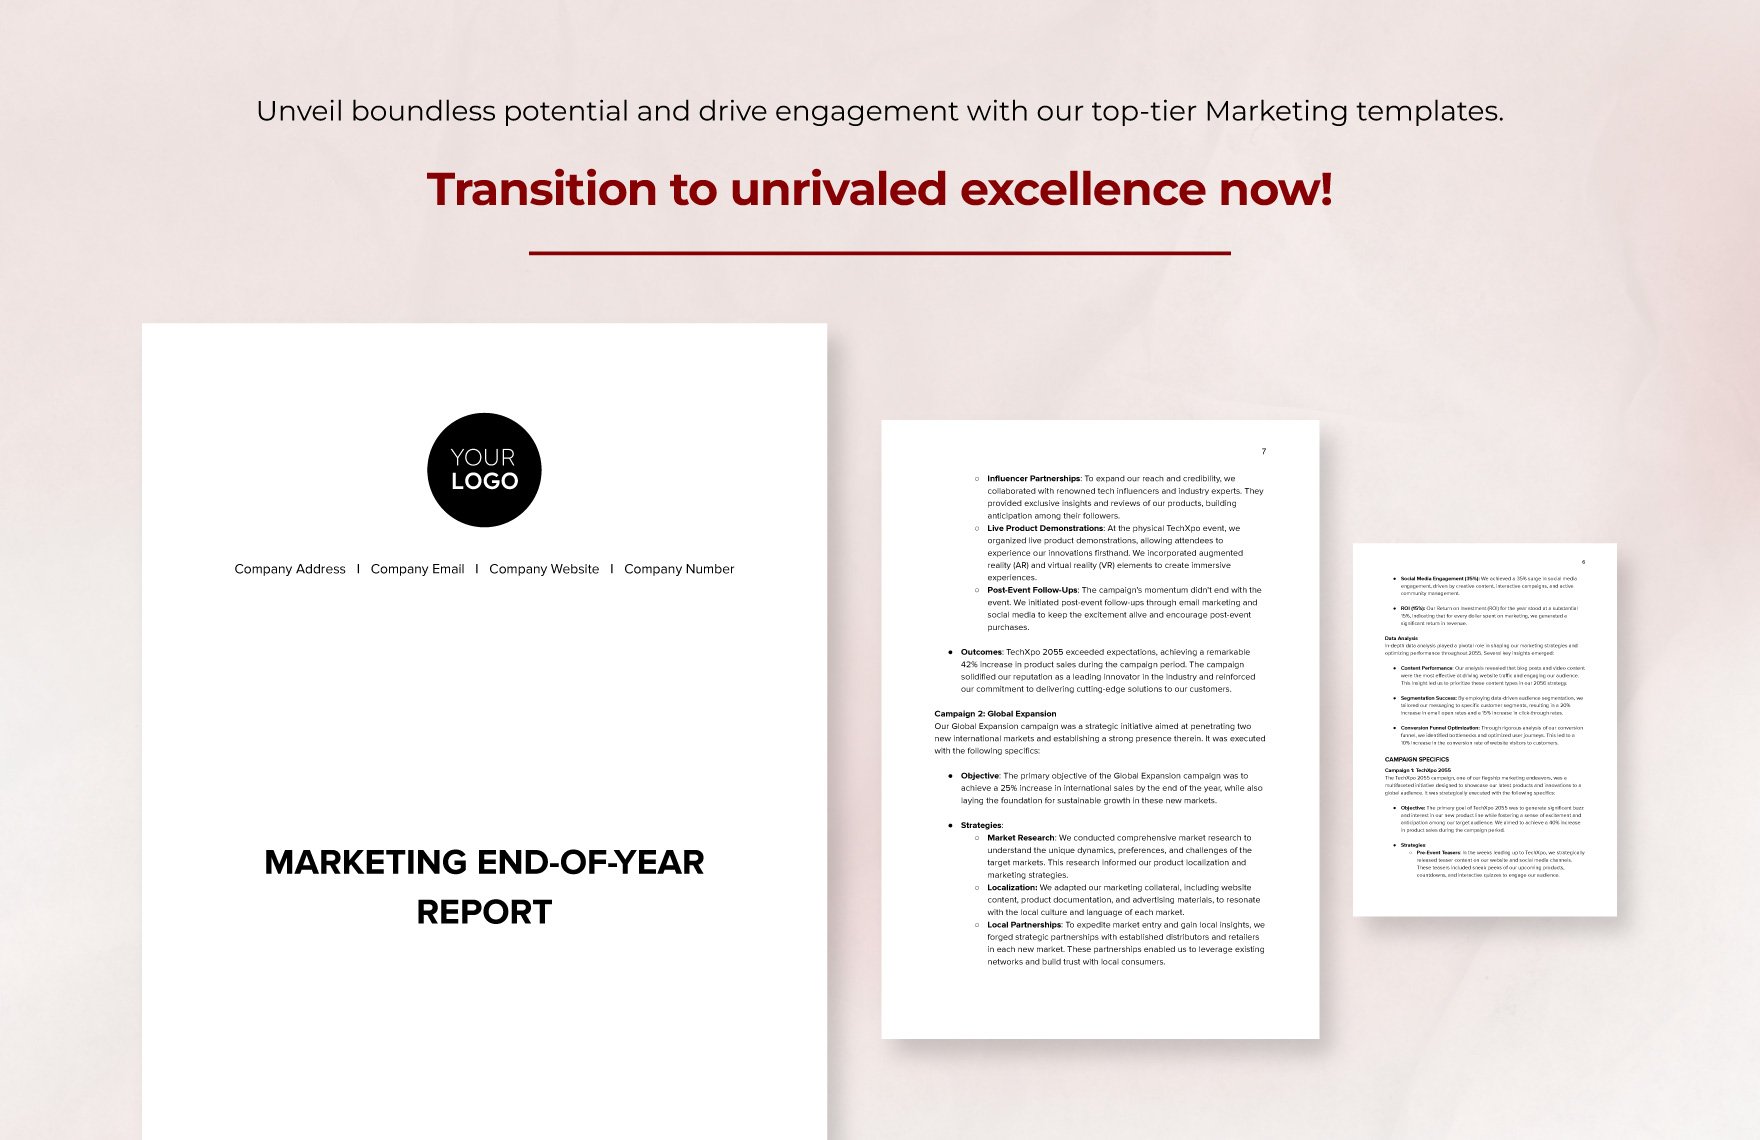 Marketing End-of-Year Report Template